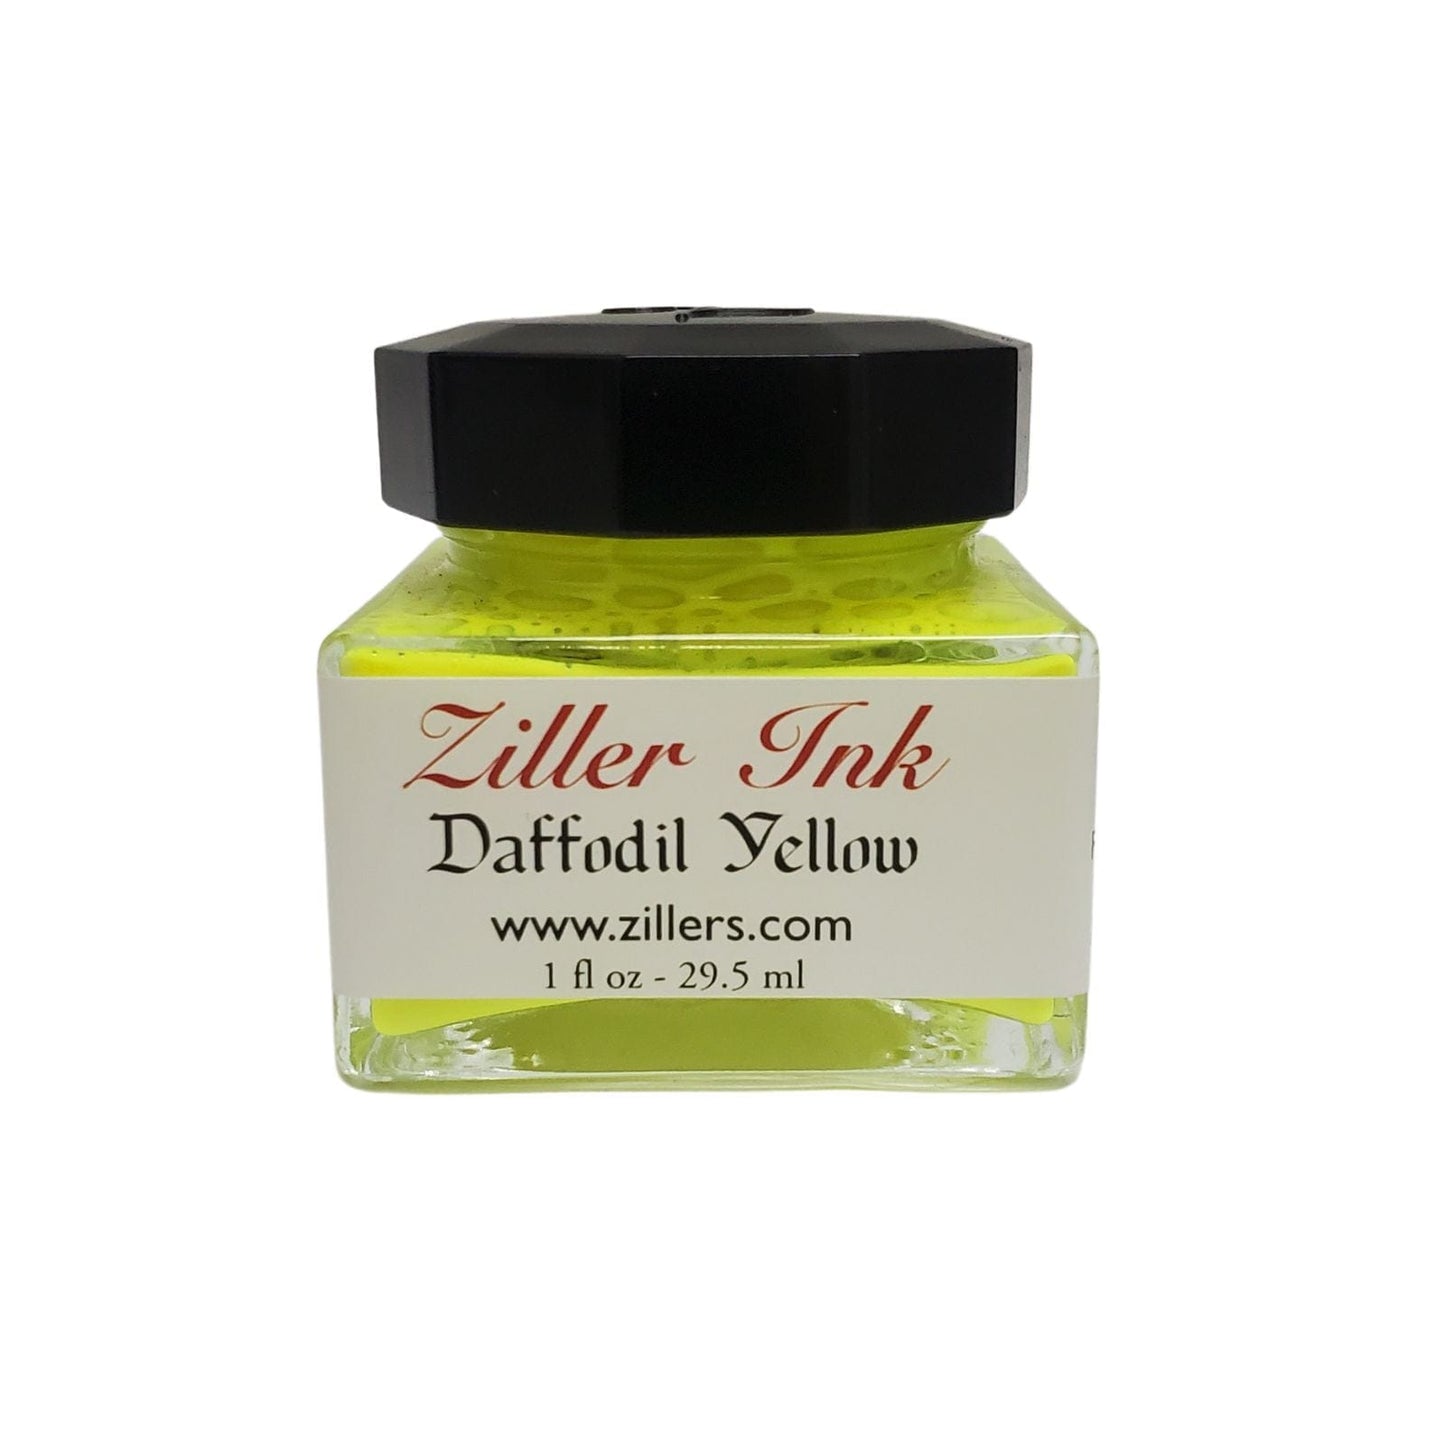 Ziller's Calligraphy Ink Ziller Ink - Calligraphy Ink - 1oz Bottle - Daffodil Yellow